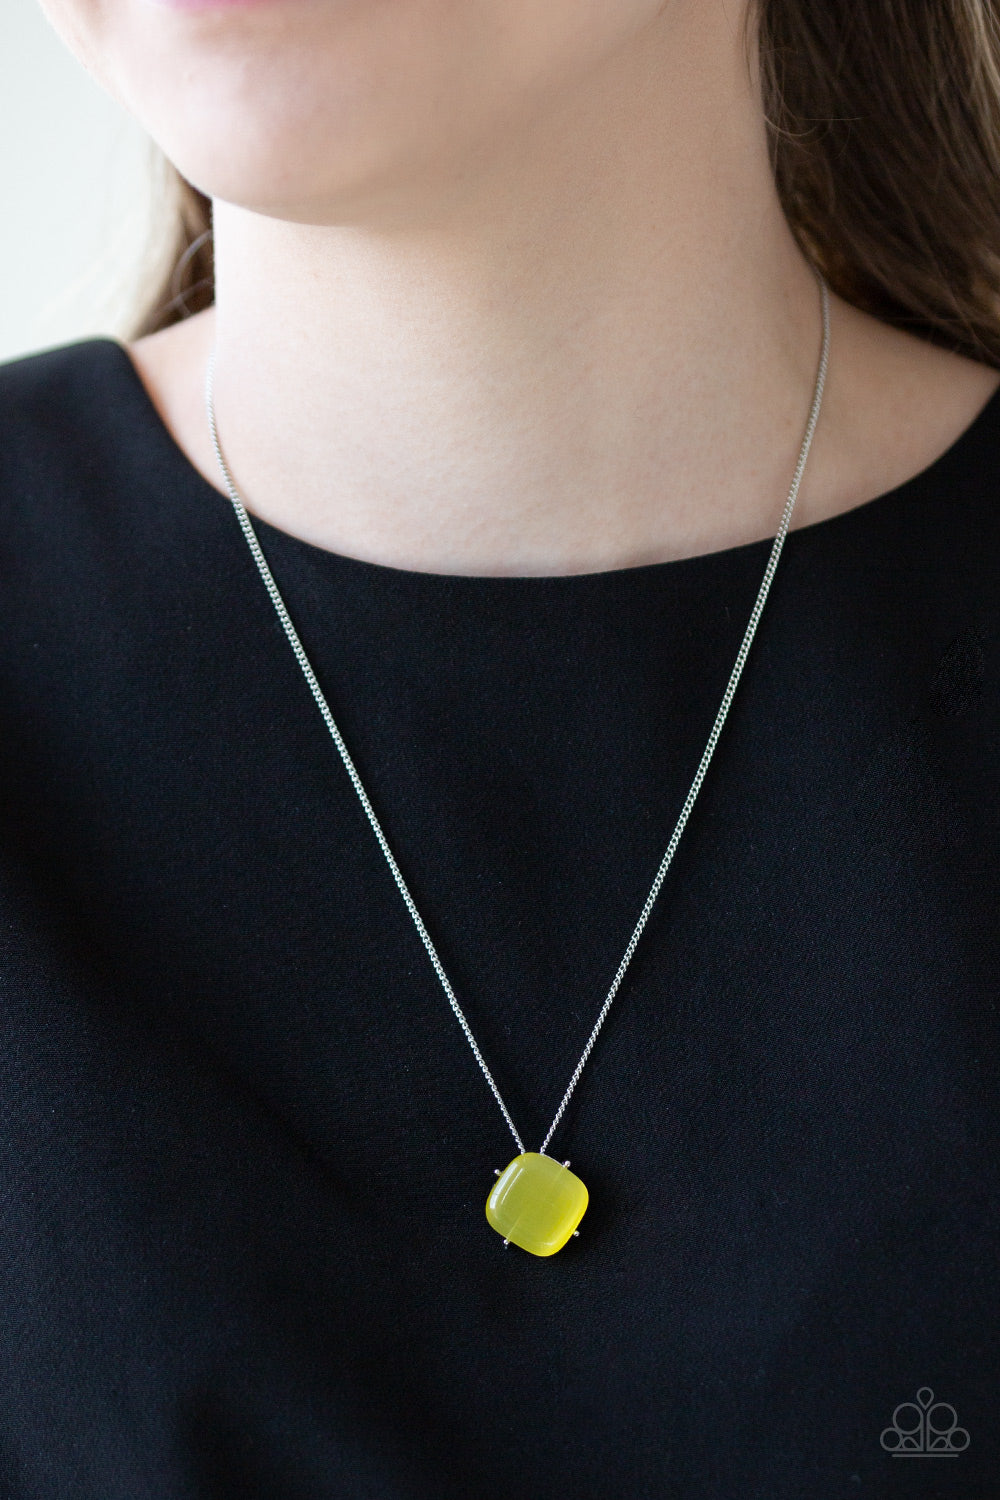 You GLOW Girl Necklace - Yellow